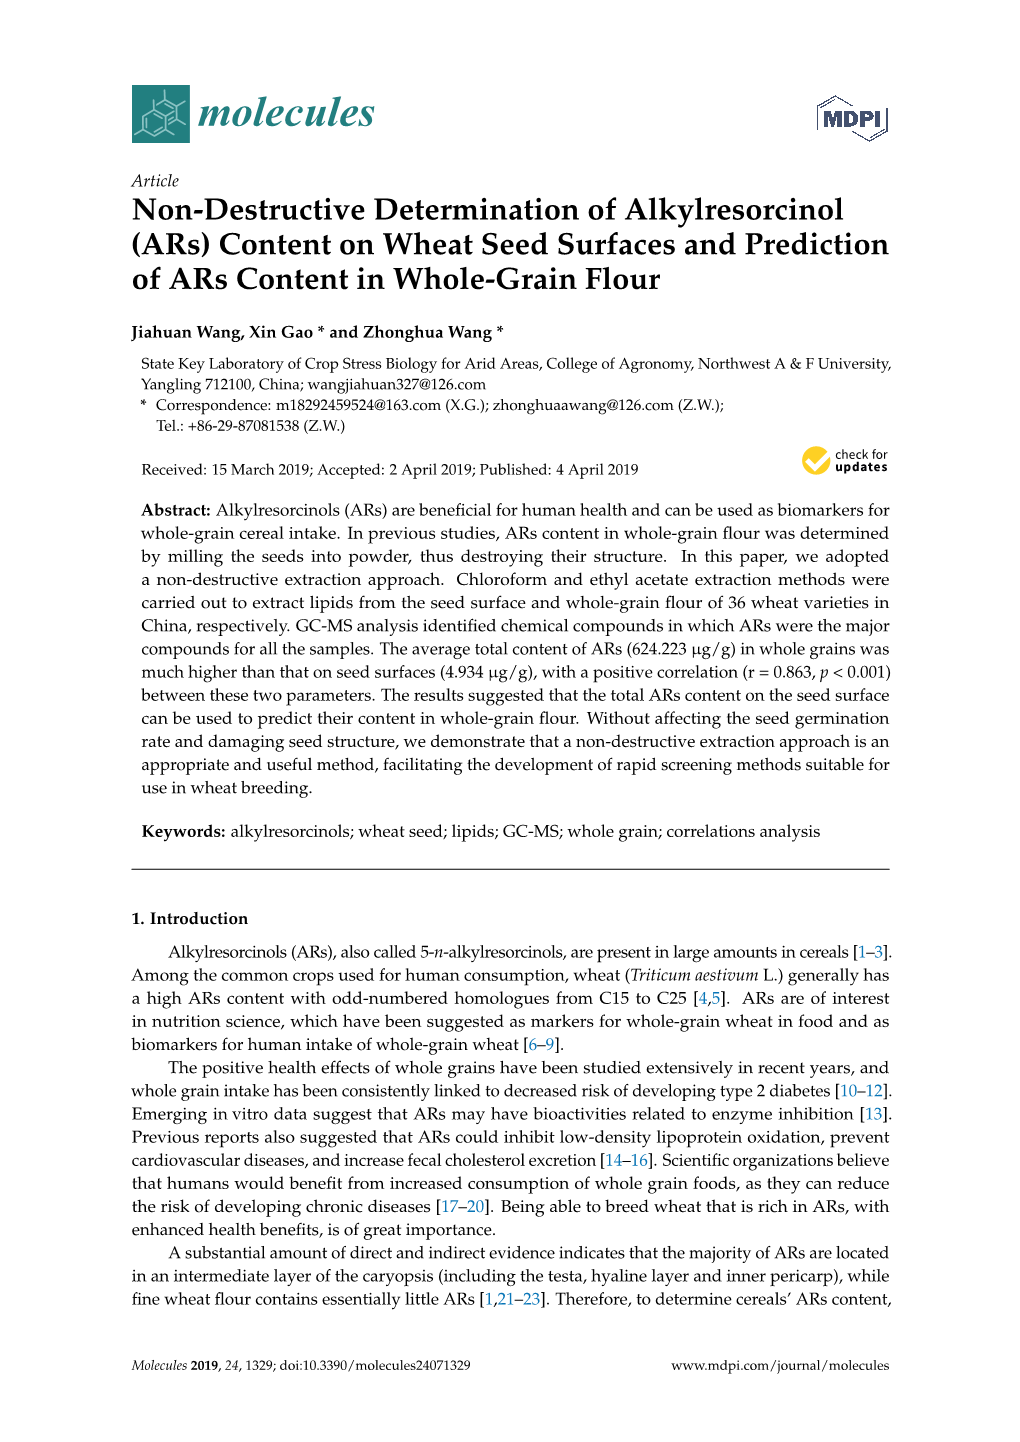 Non-Destructive Determination of Alkylresorcinol (Ars) Content on Wheat Seed Surfaces and Prediction of Ars Content in Whole-Grain Flour